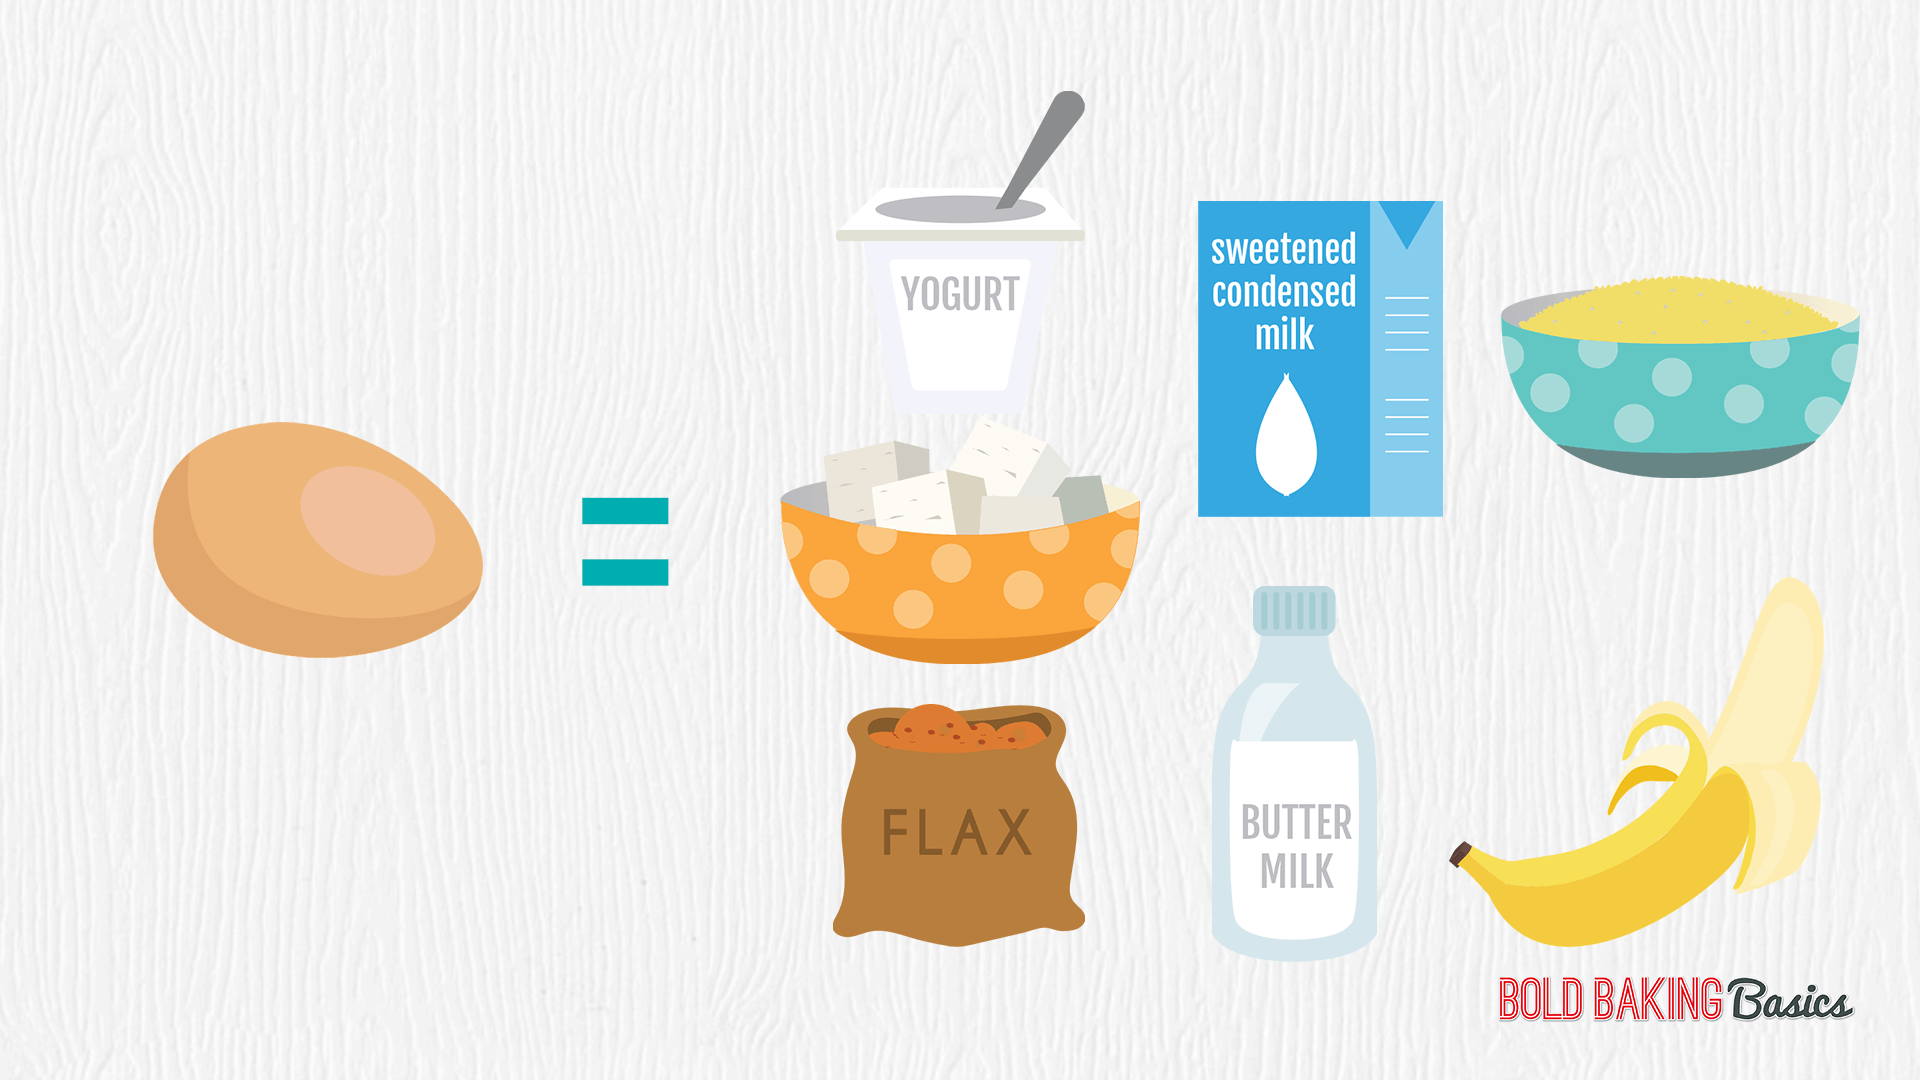 Egg Substitutes for baking: The BEST conversion chart for substituting Eggs in Vegan and Vegetarian Baking.